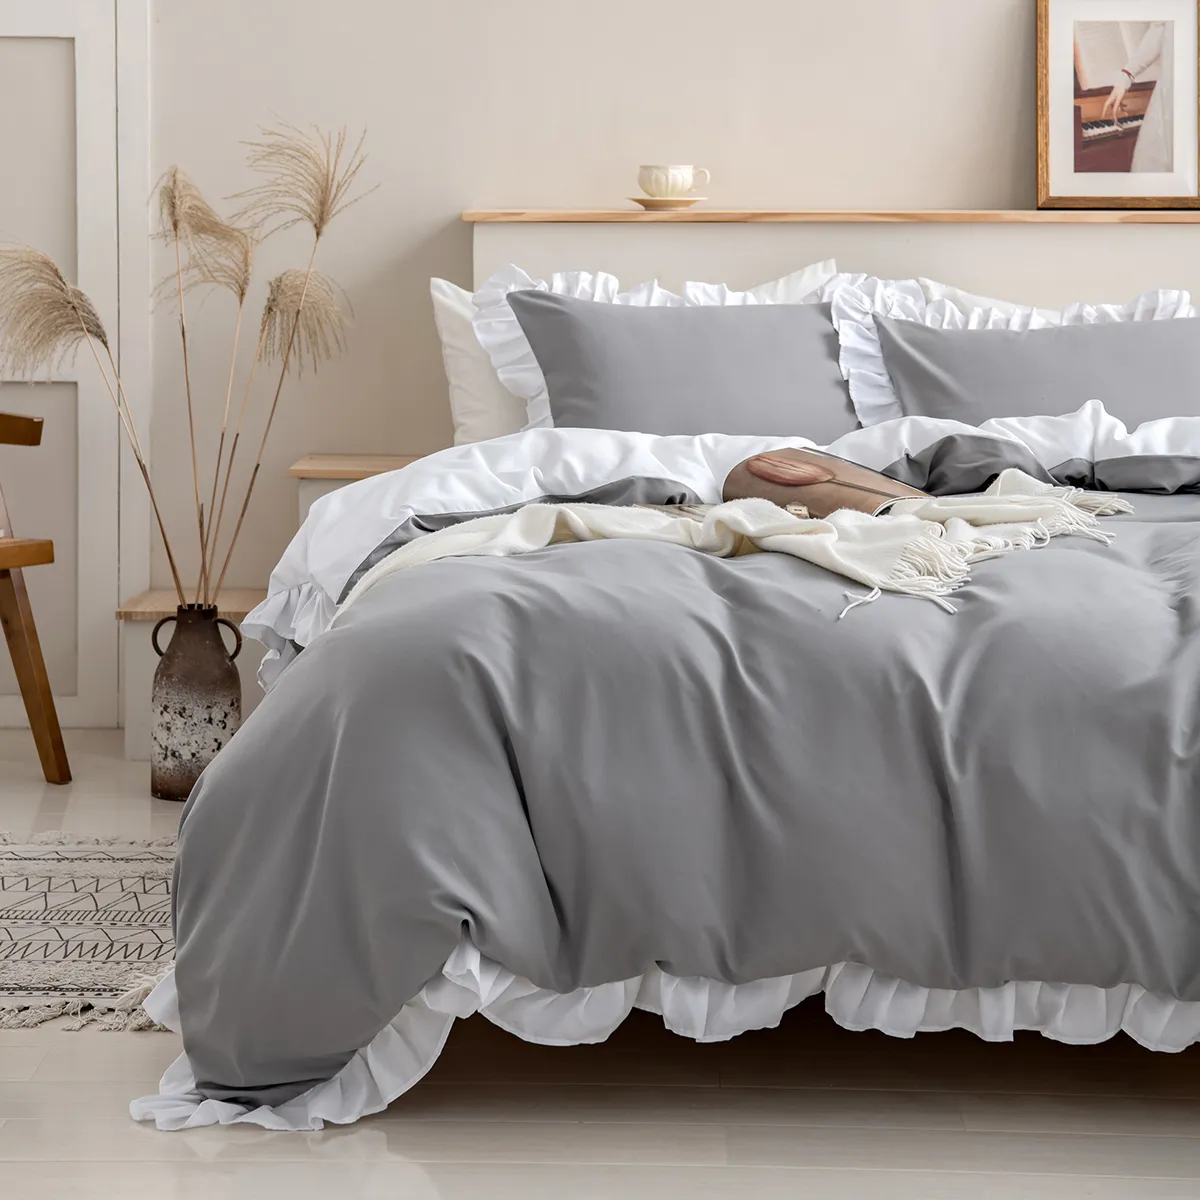 2/3pcs Soft and Comfortable Solid Color Bedding Set,including Duvet Cover and Pillowcases Grey big image 1